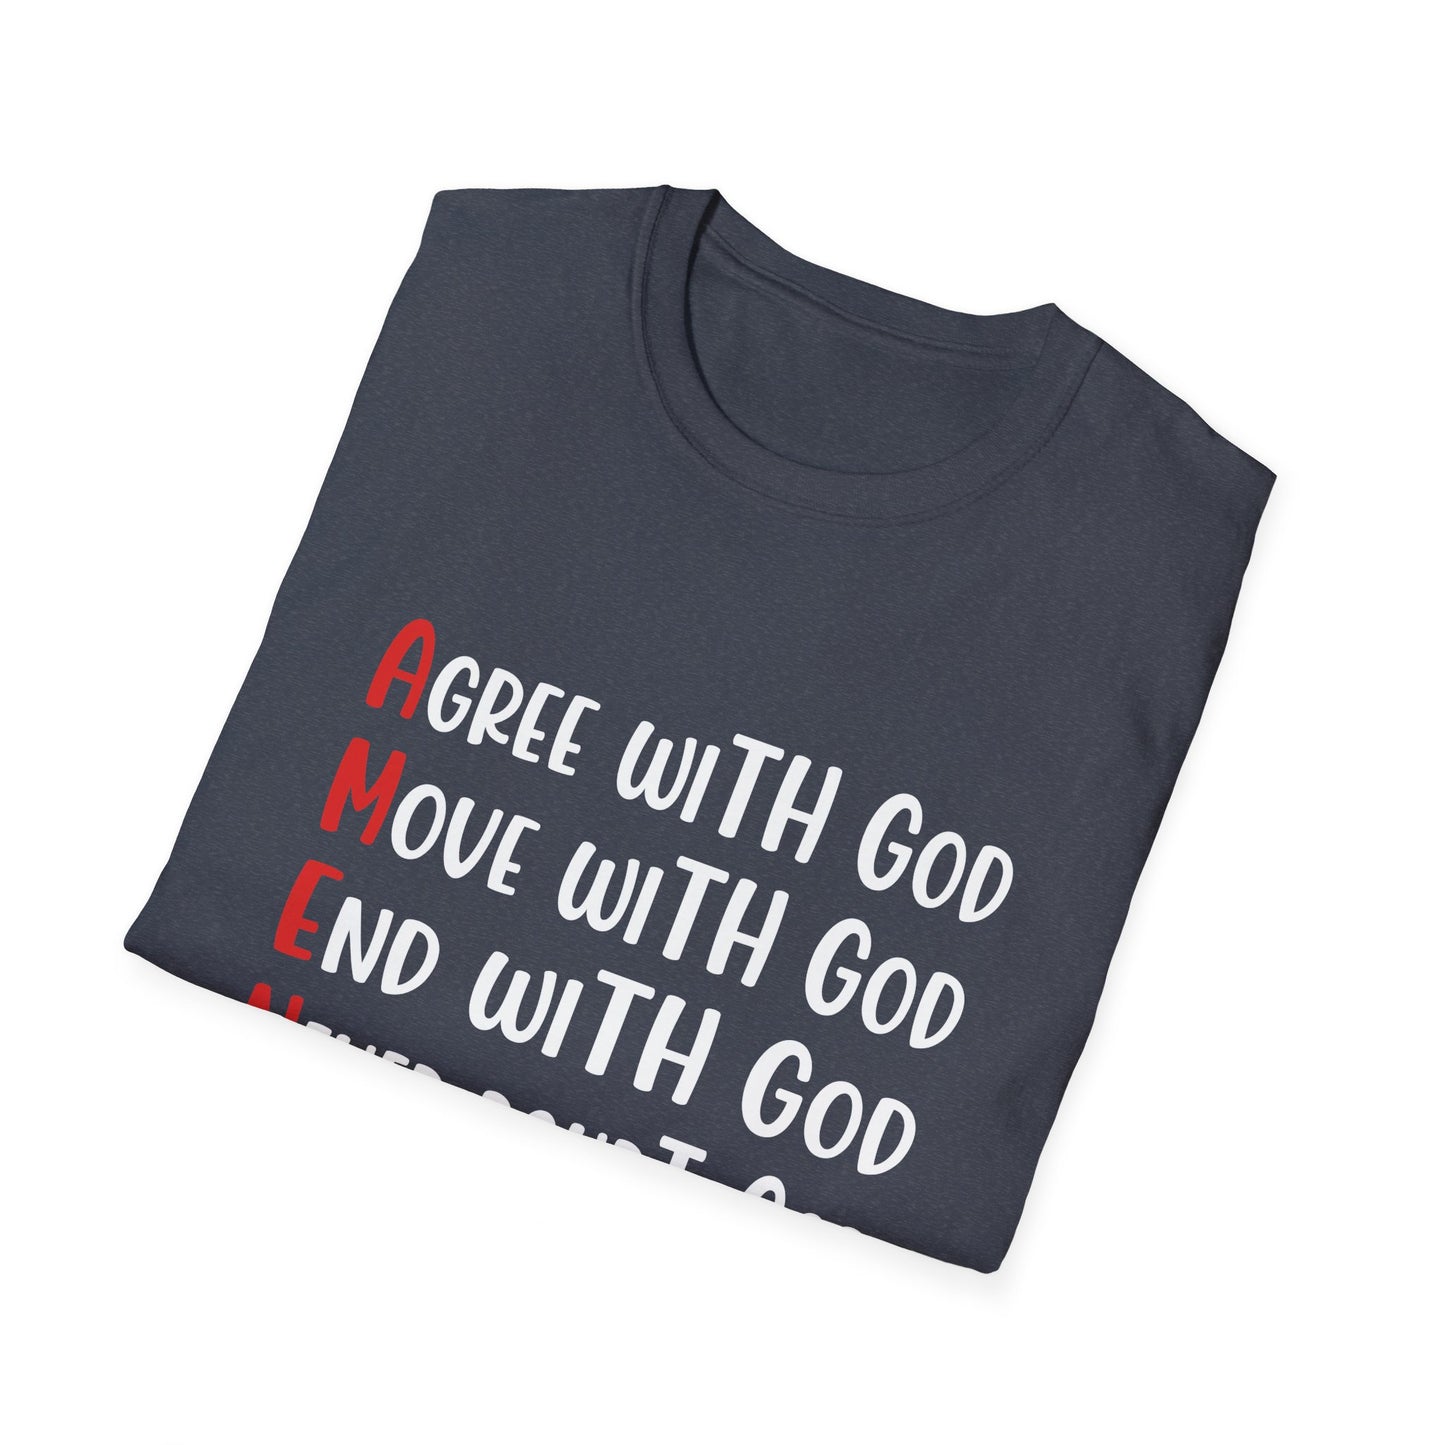 AMEN Agree, Move, End With God Never Doubt God  Unisex Christian T-shirt